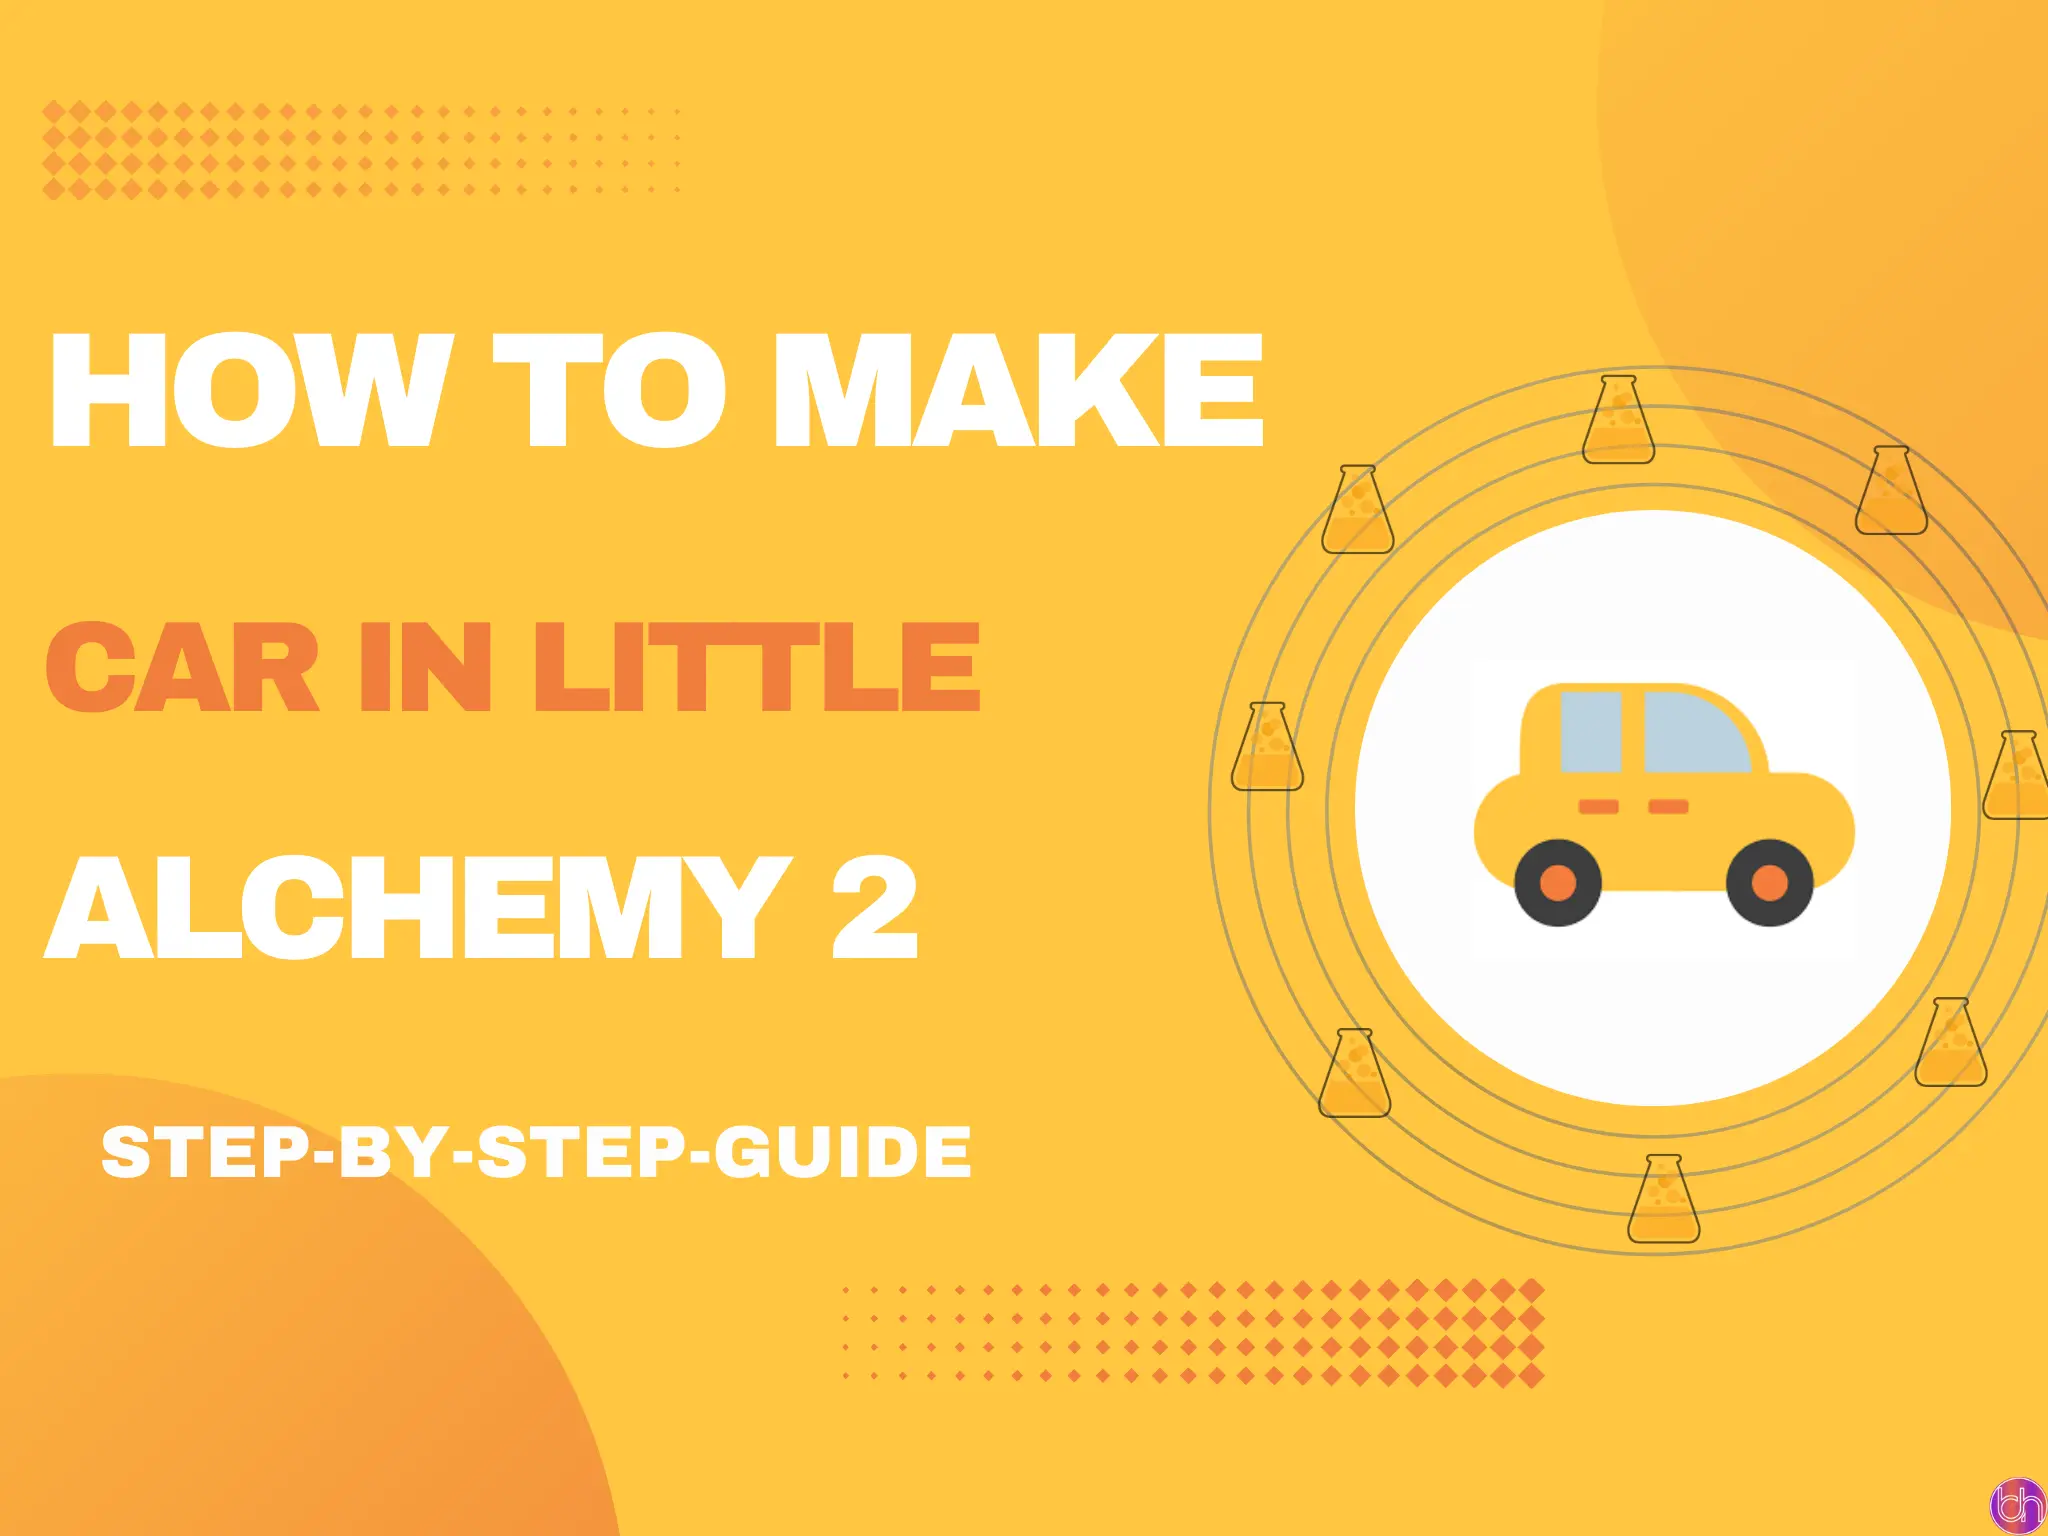 How to make Car in little alchemy 2